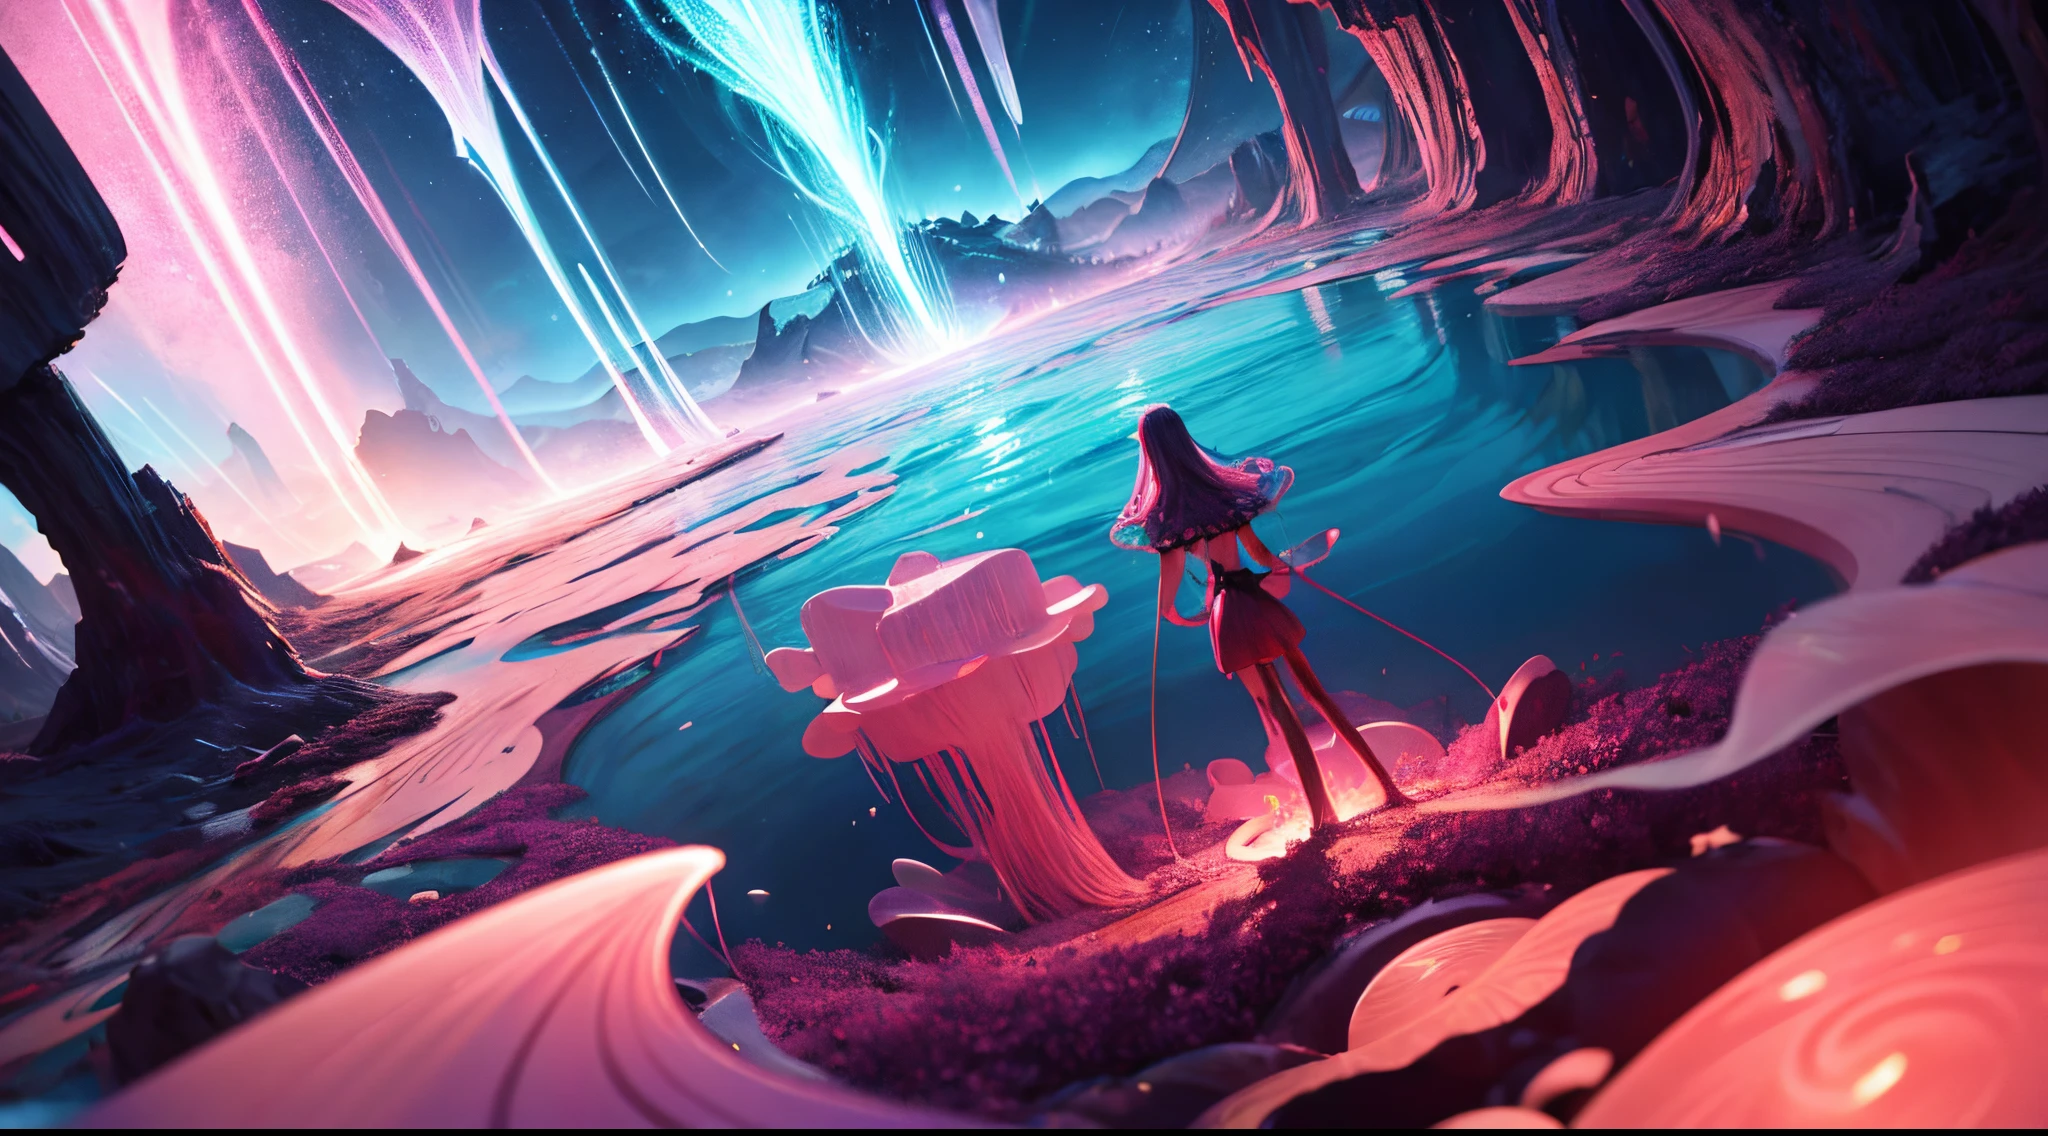 Challenge AI to forge an otherworldly candy land, merging surreal elements like floating candies, cascading chocolate waterfalls, and ethereal candy clouds. Aim for UHD resolution to enhance the dreamlike quality.